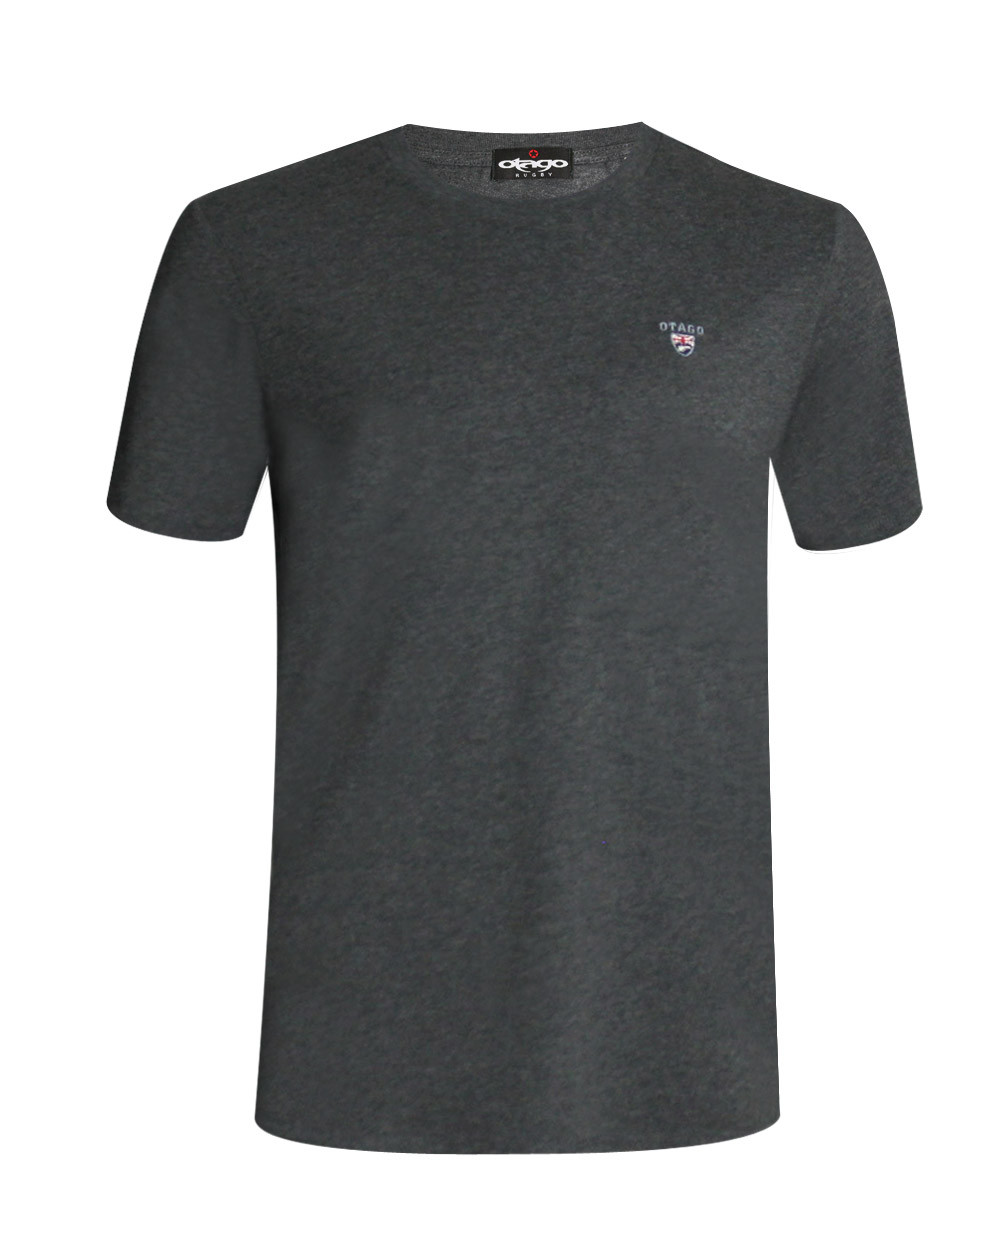 Tee shirt Buenaray uni Otago rugby volcano grey col rond pour homme